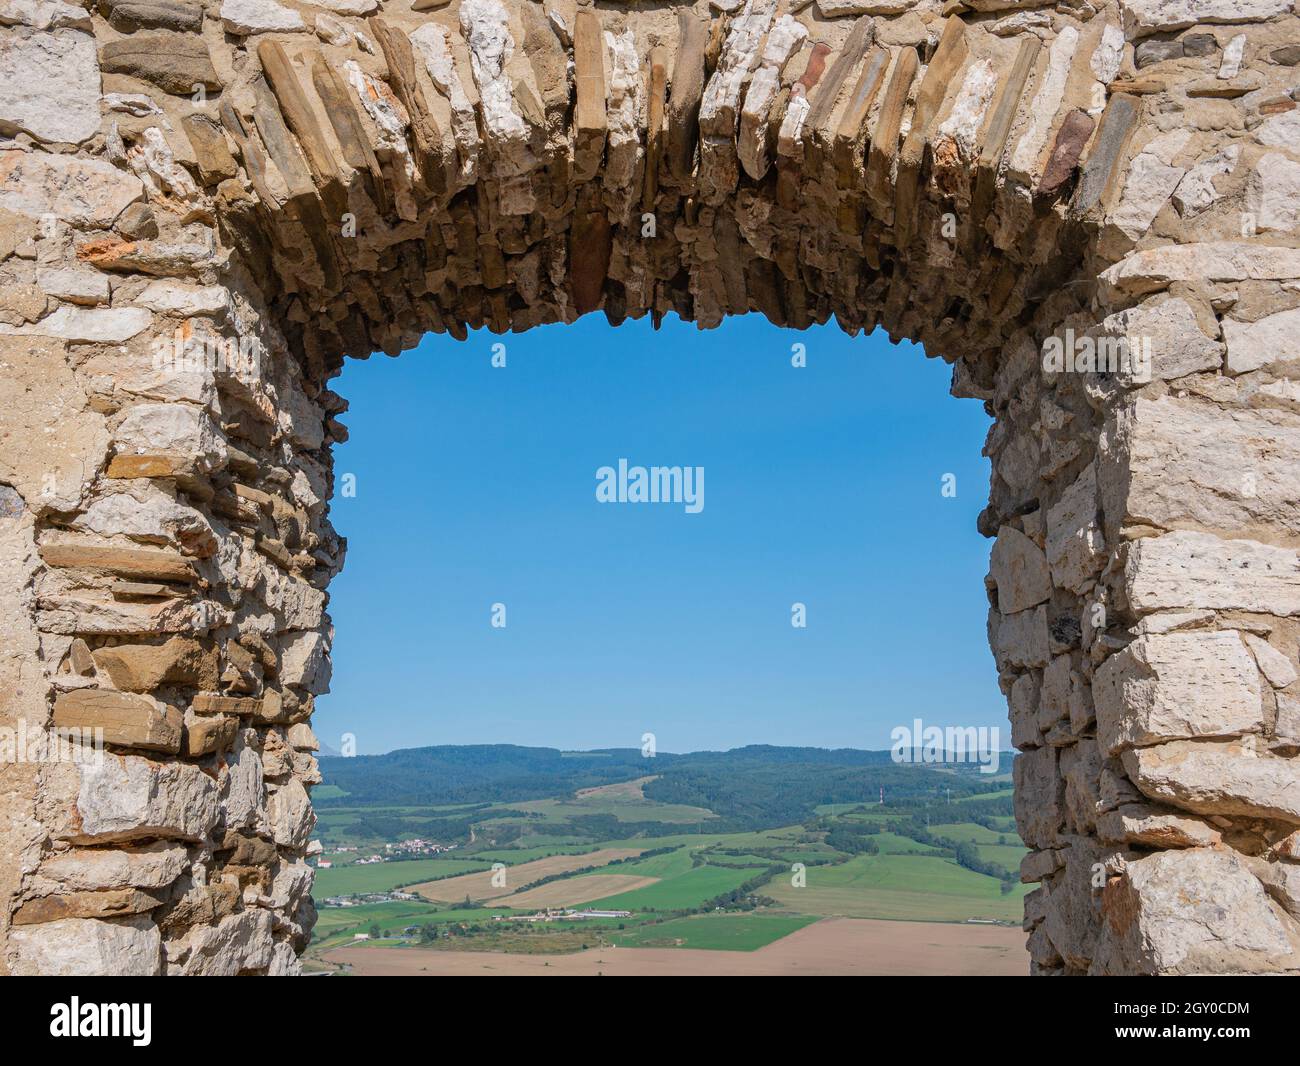 Bricked window opening from old ruin with beautiful view Stock Photo